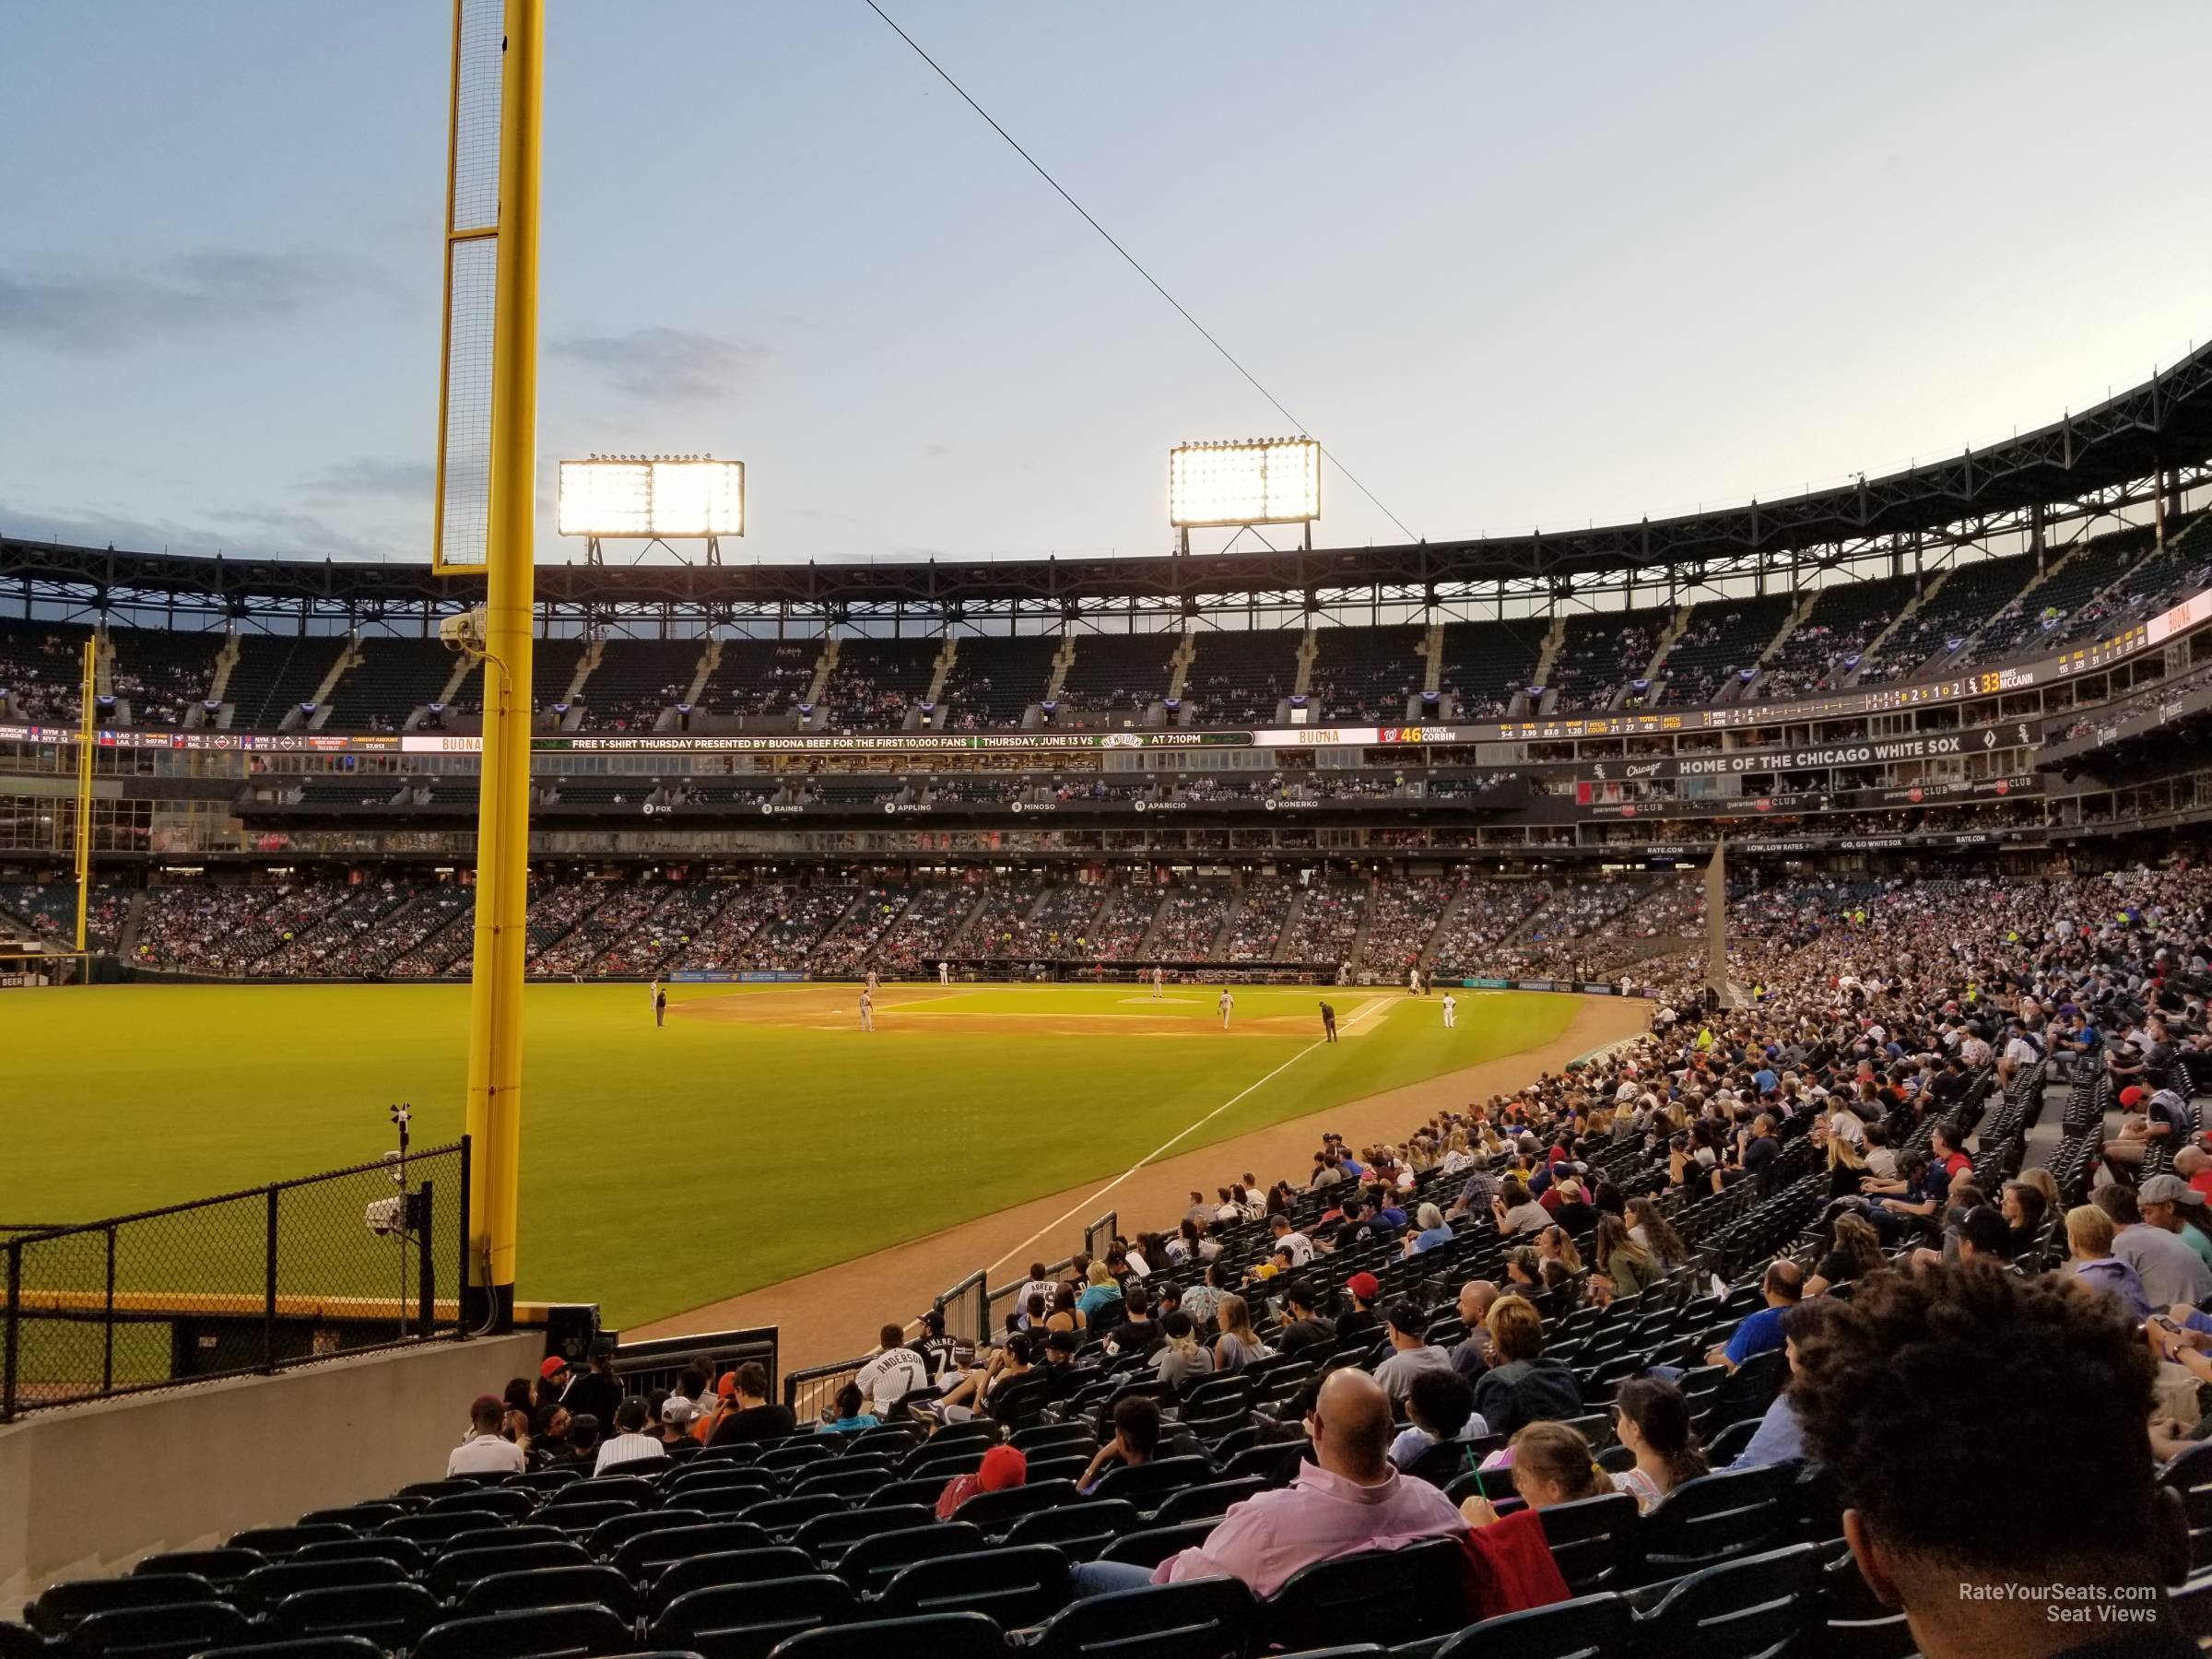 section 155, row 22 seat view  - guaranteed rate field